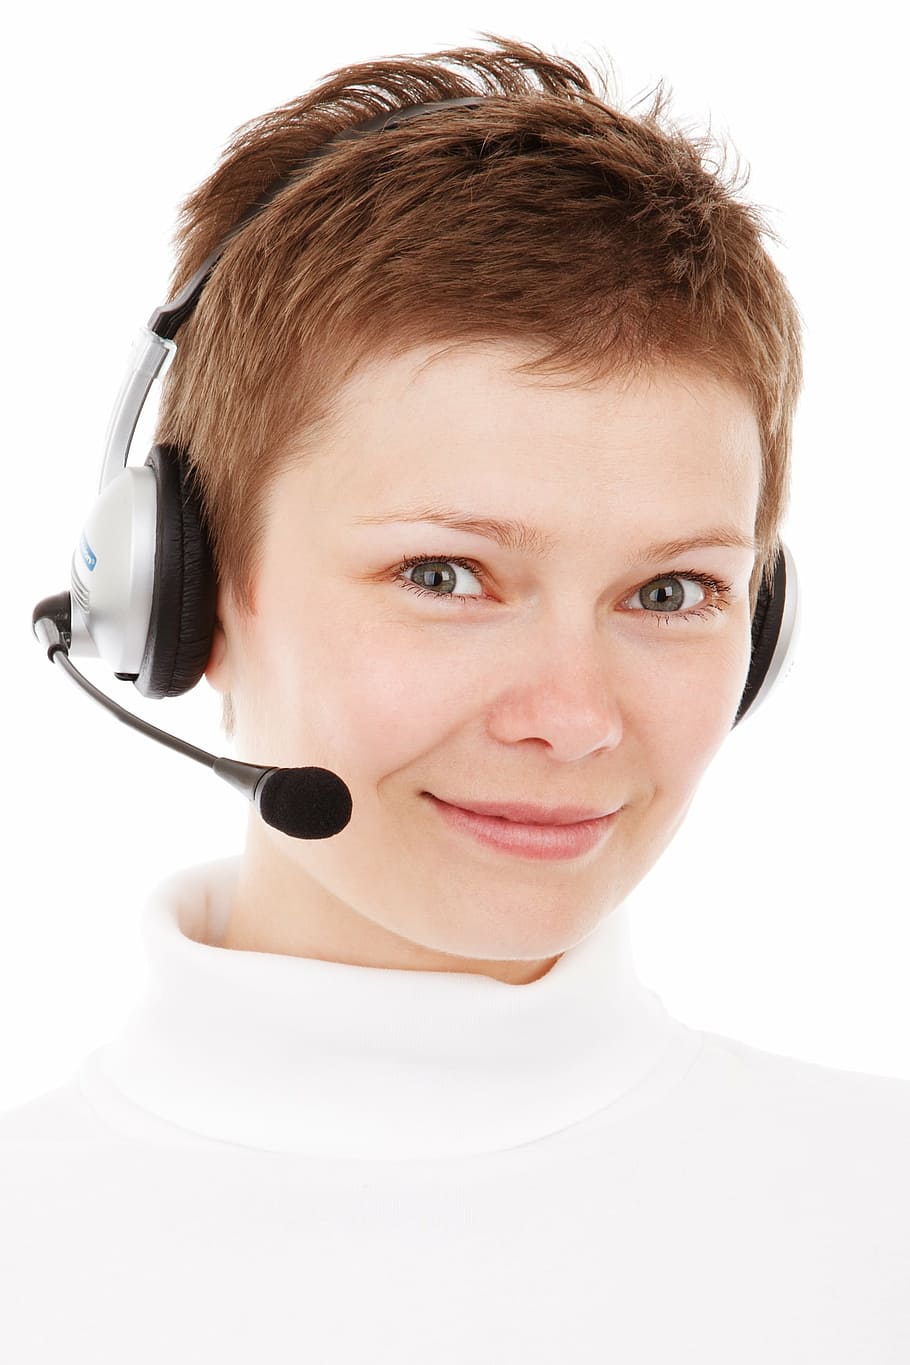 woman wearing white turtleneck shirt with gray headset, agent